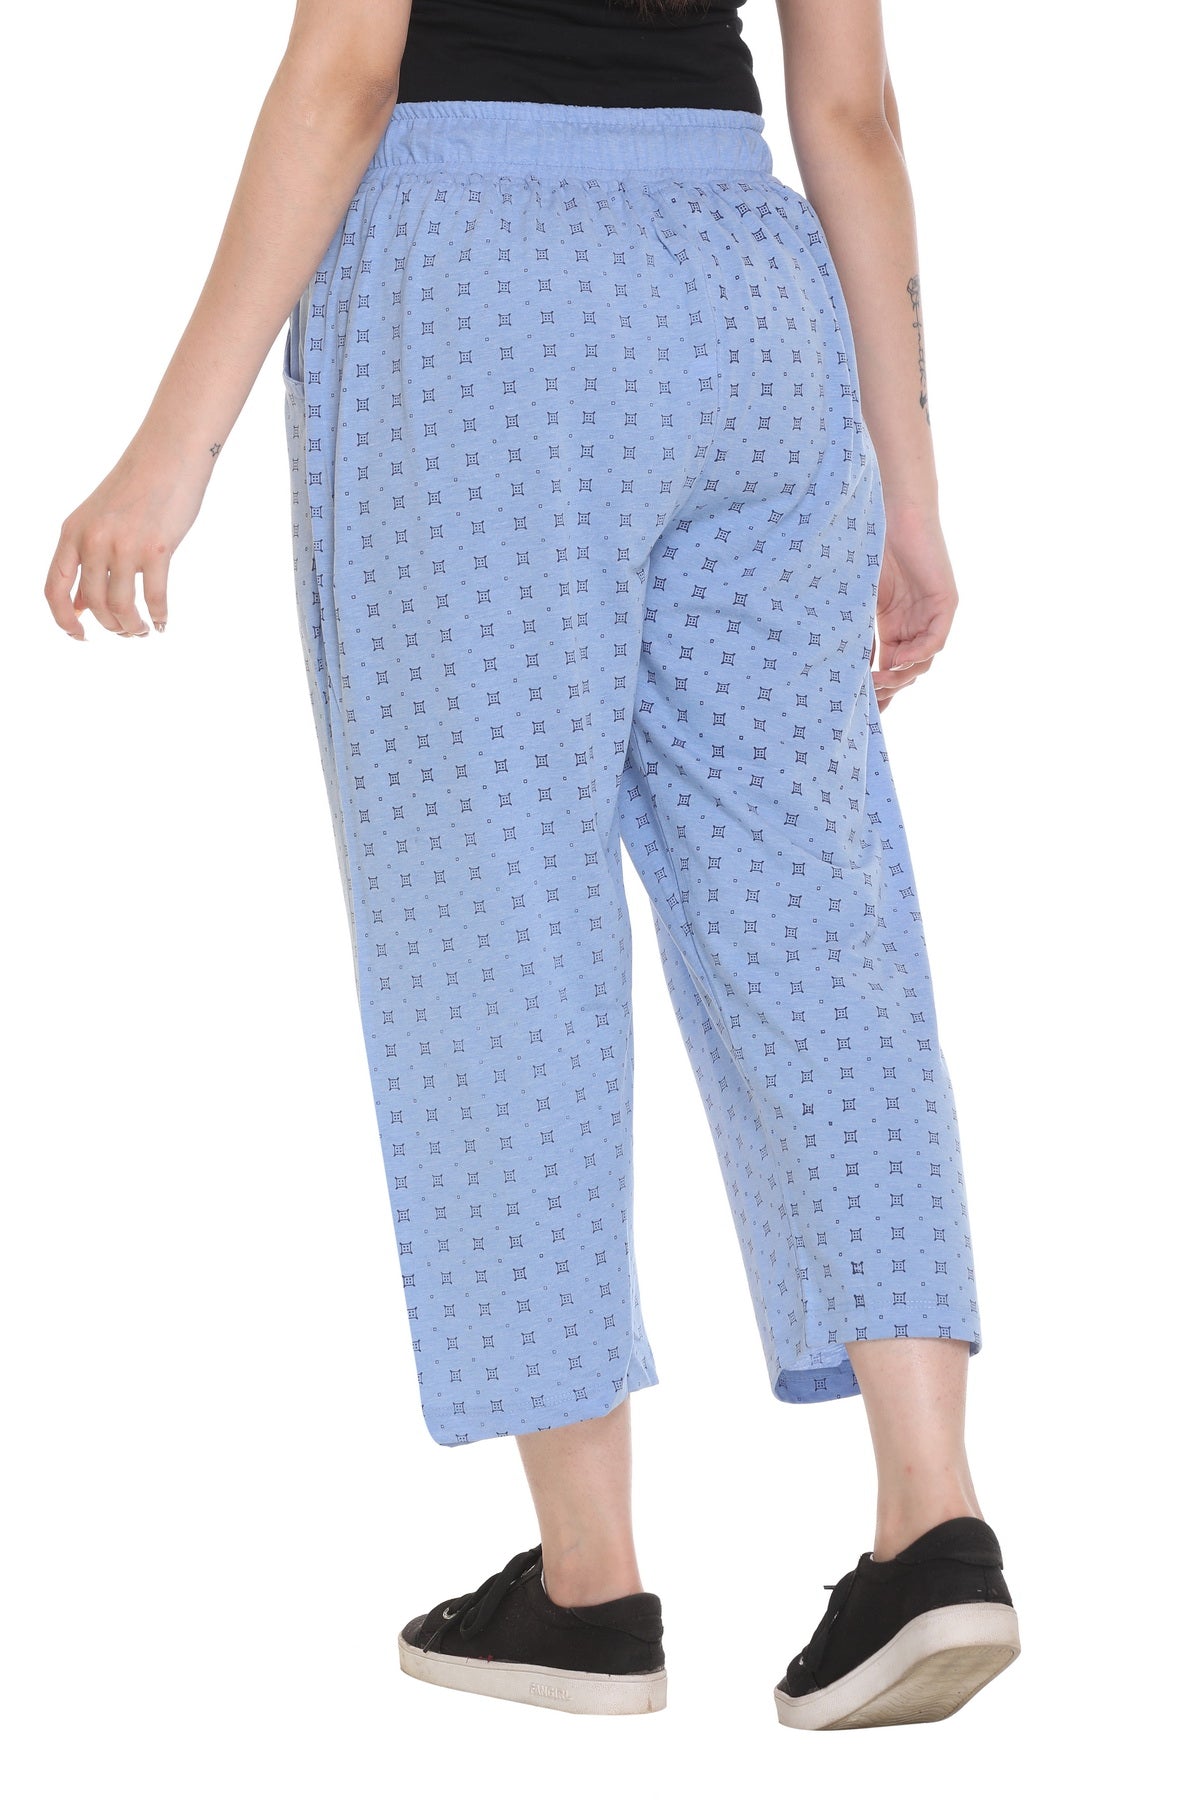 Stylish Sky Blue Printed Cotton Plus Size Capri For Women Online In India